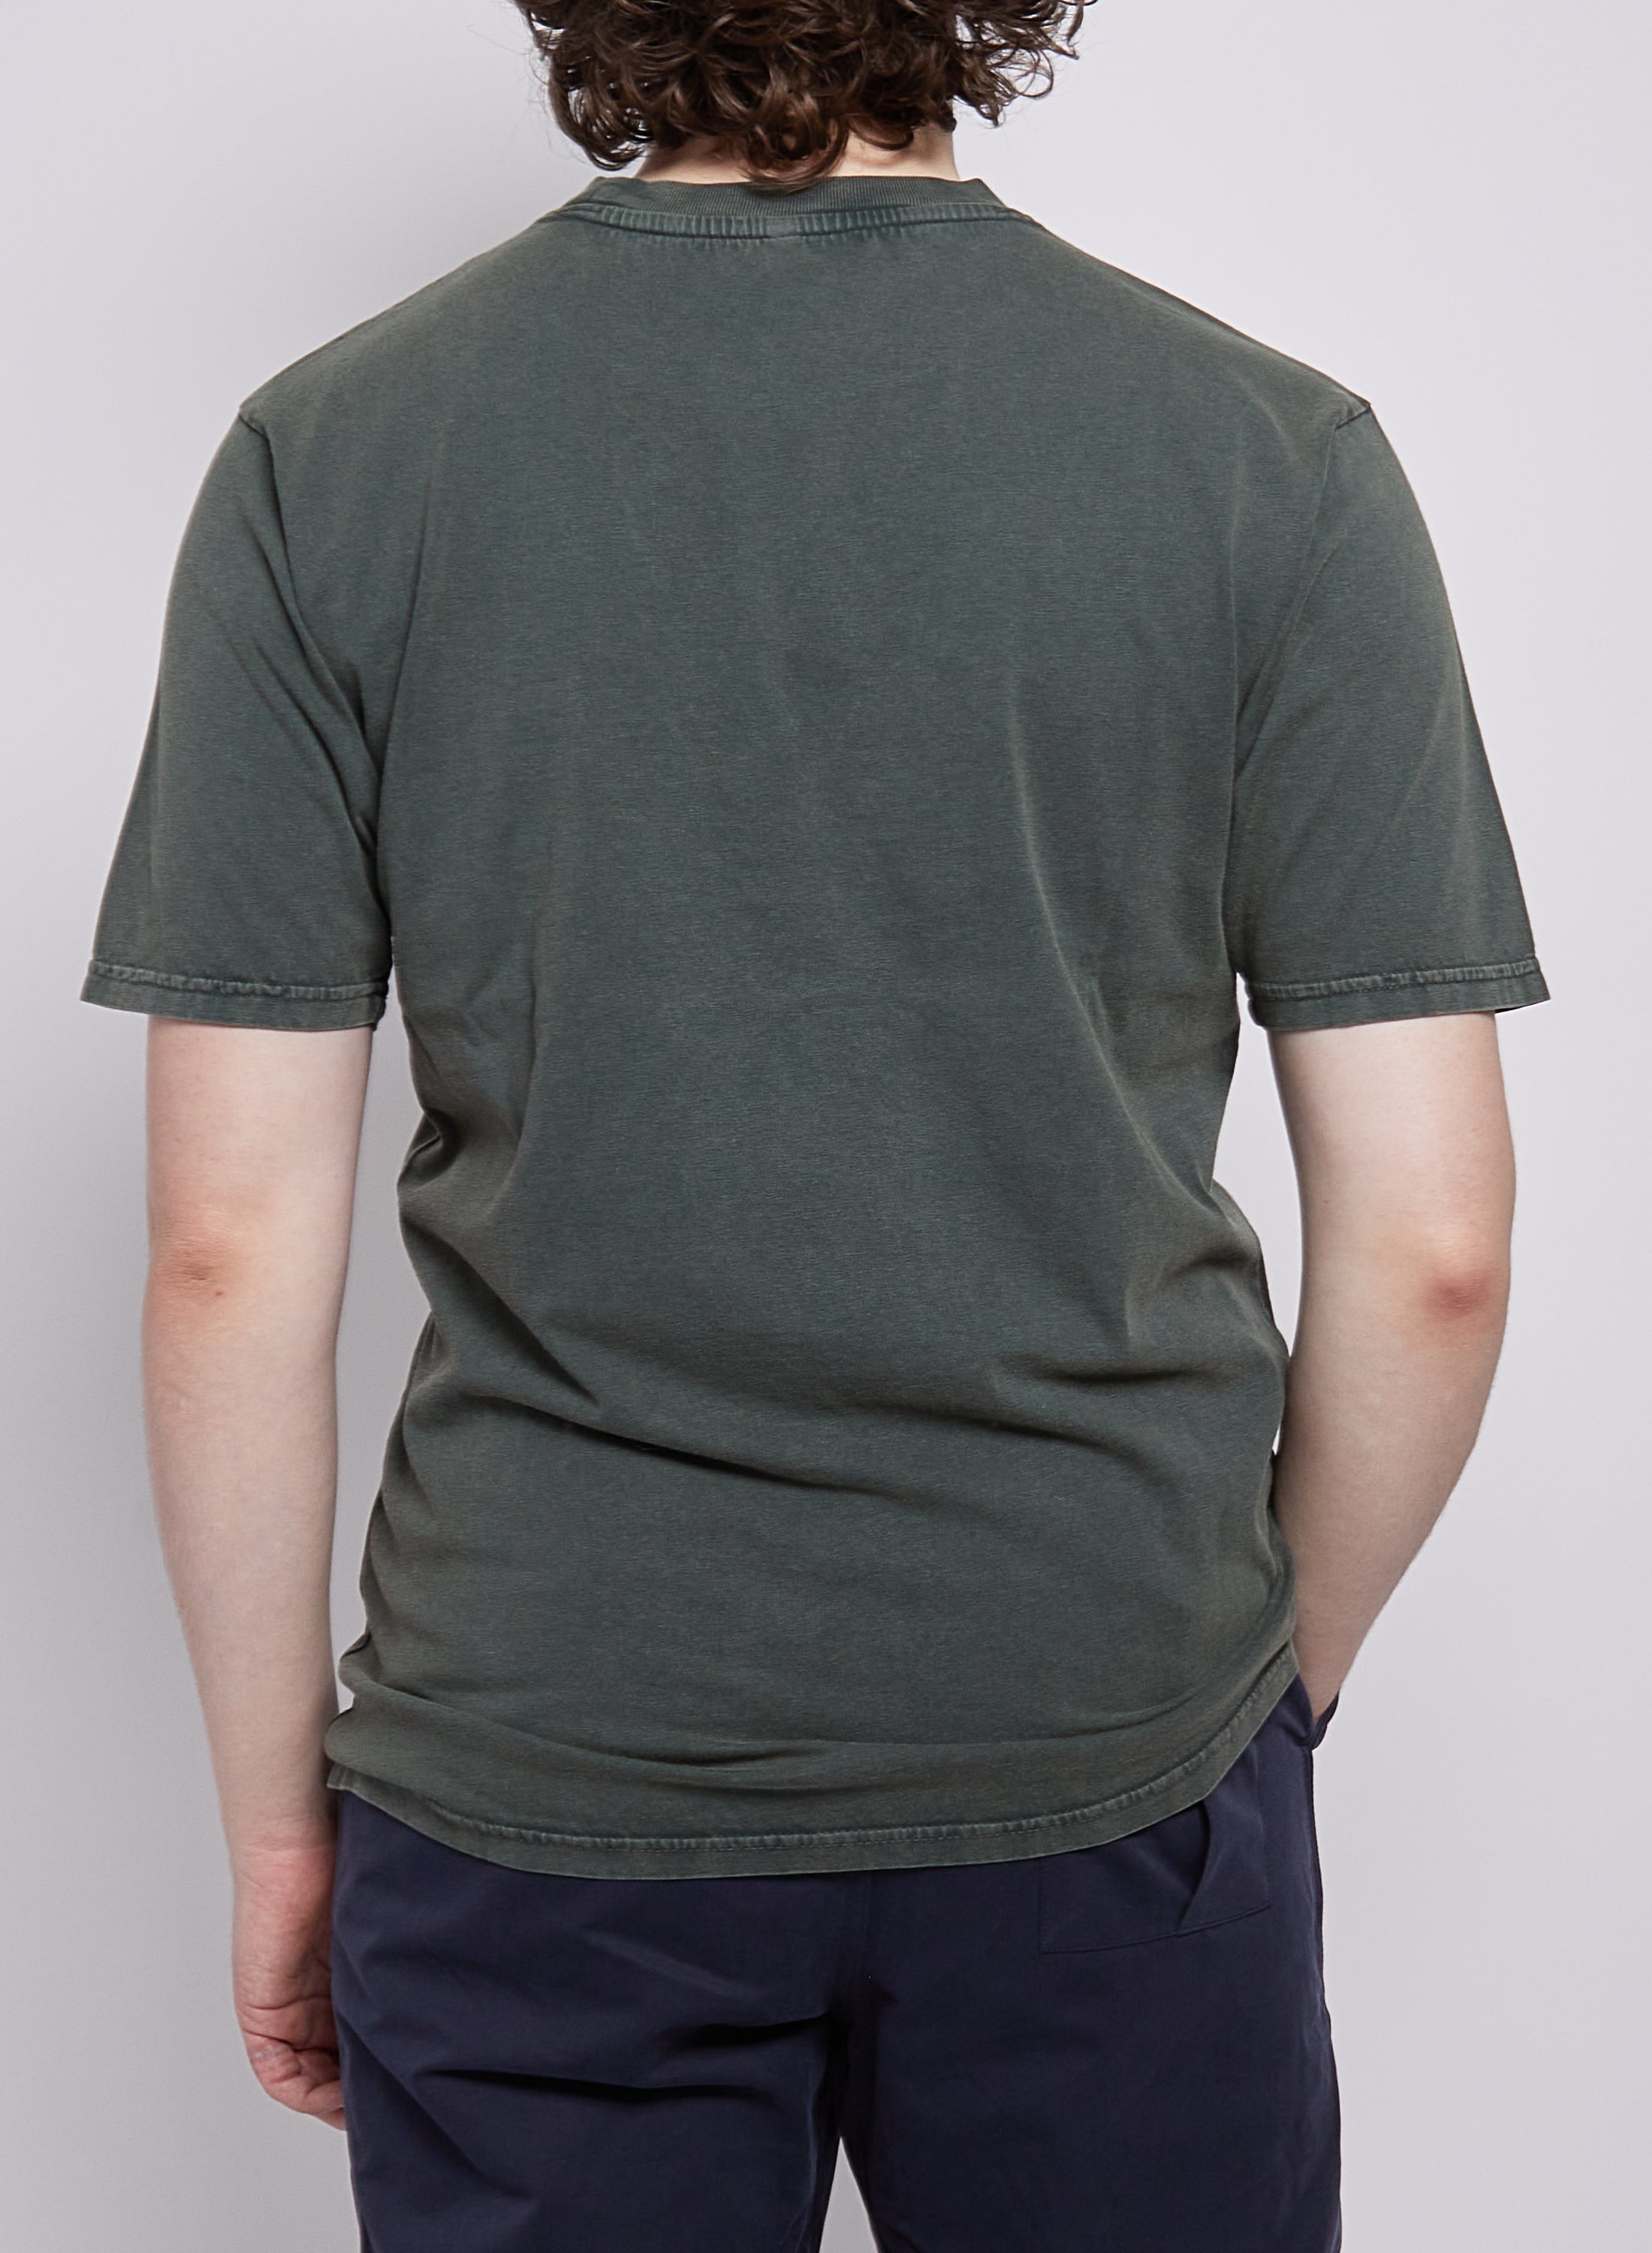 Classic Relaxed Fit Tee in Stone Wash Green - 4